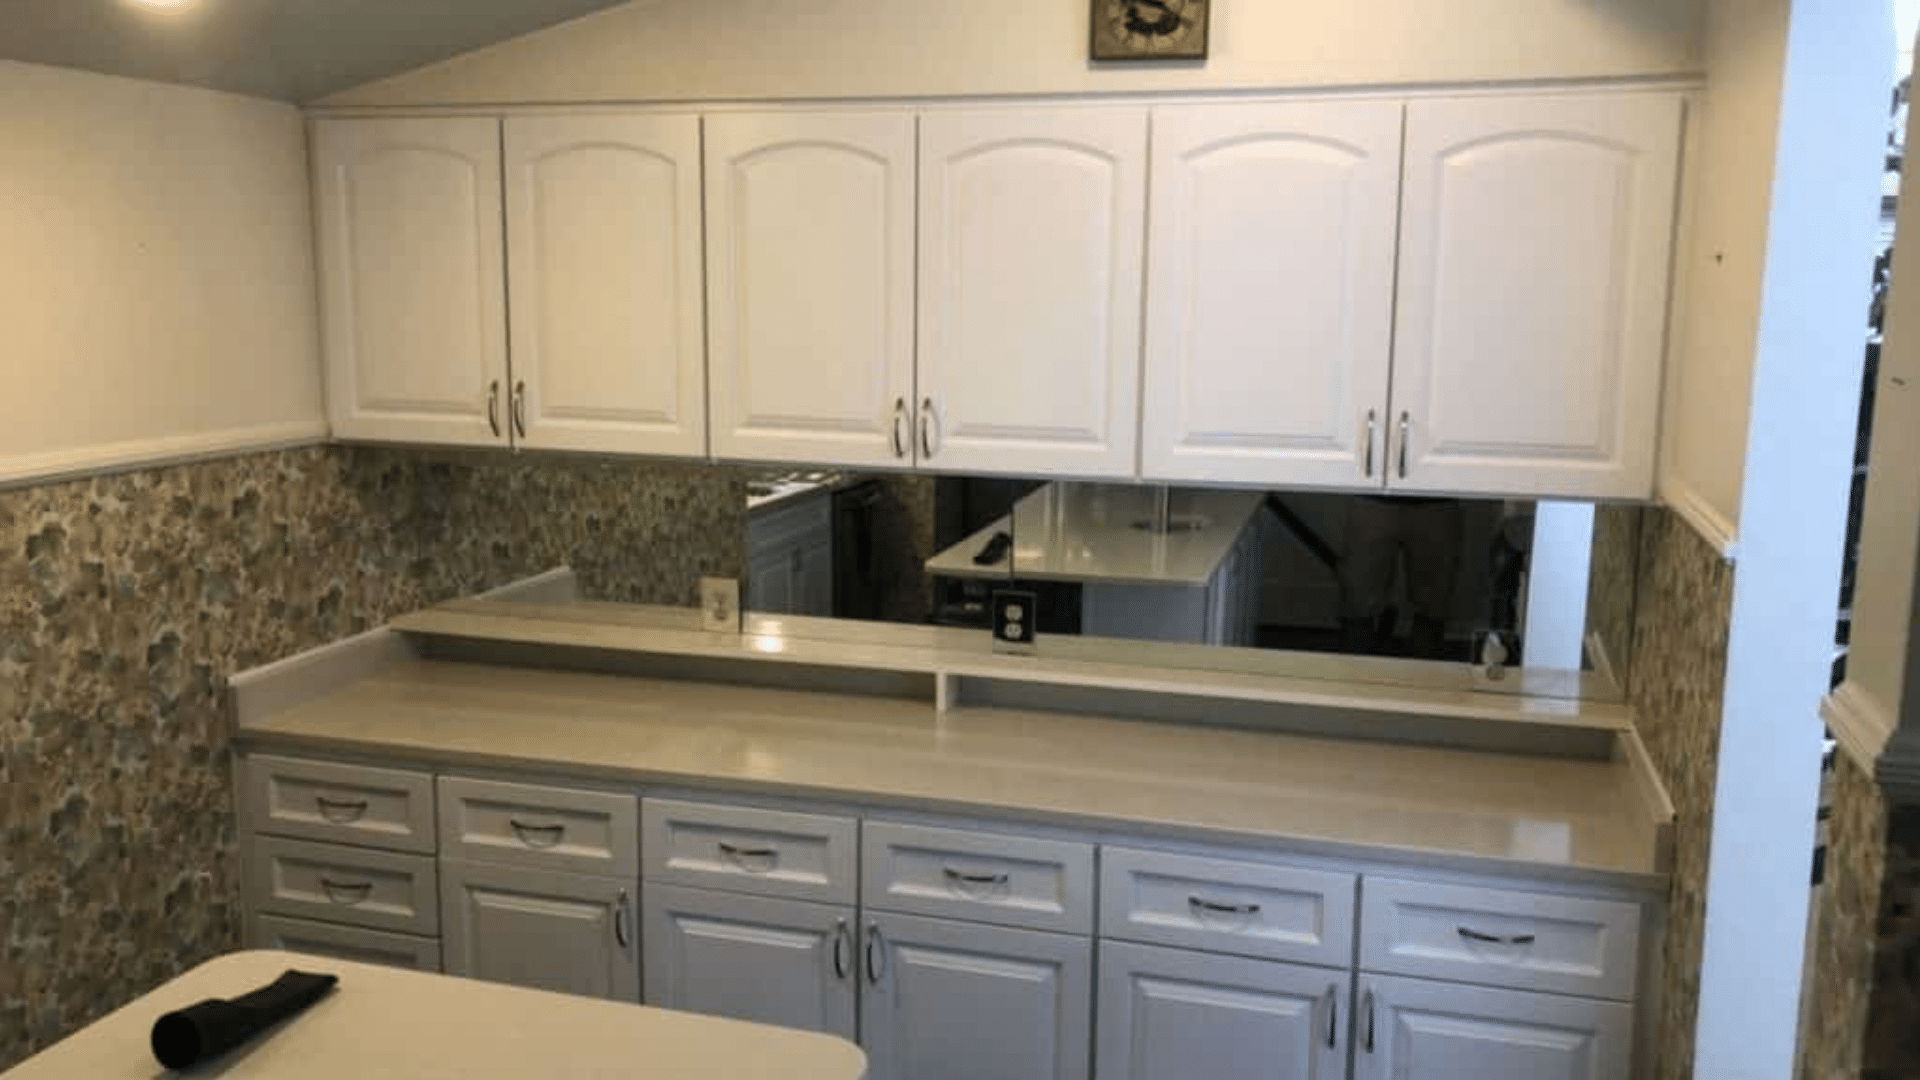 Mid Sized Kitchen Cabinet Reface In Betton Woods – 15400 